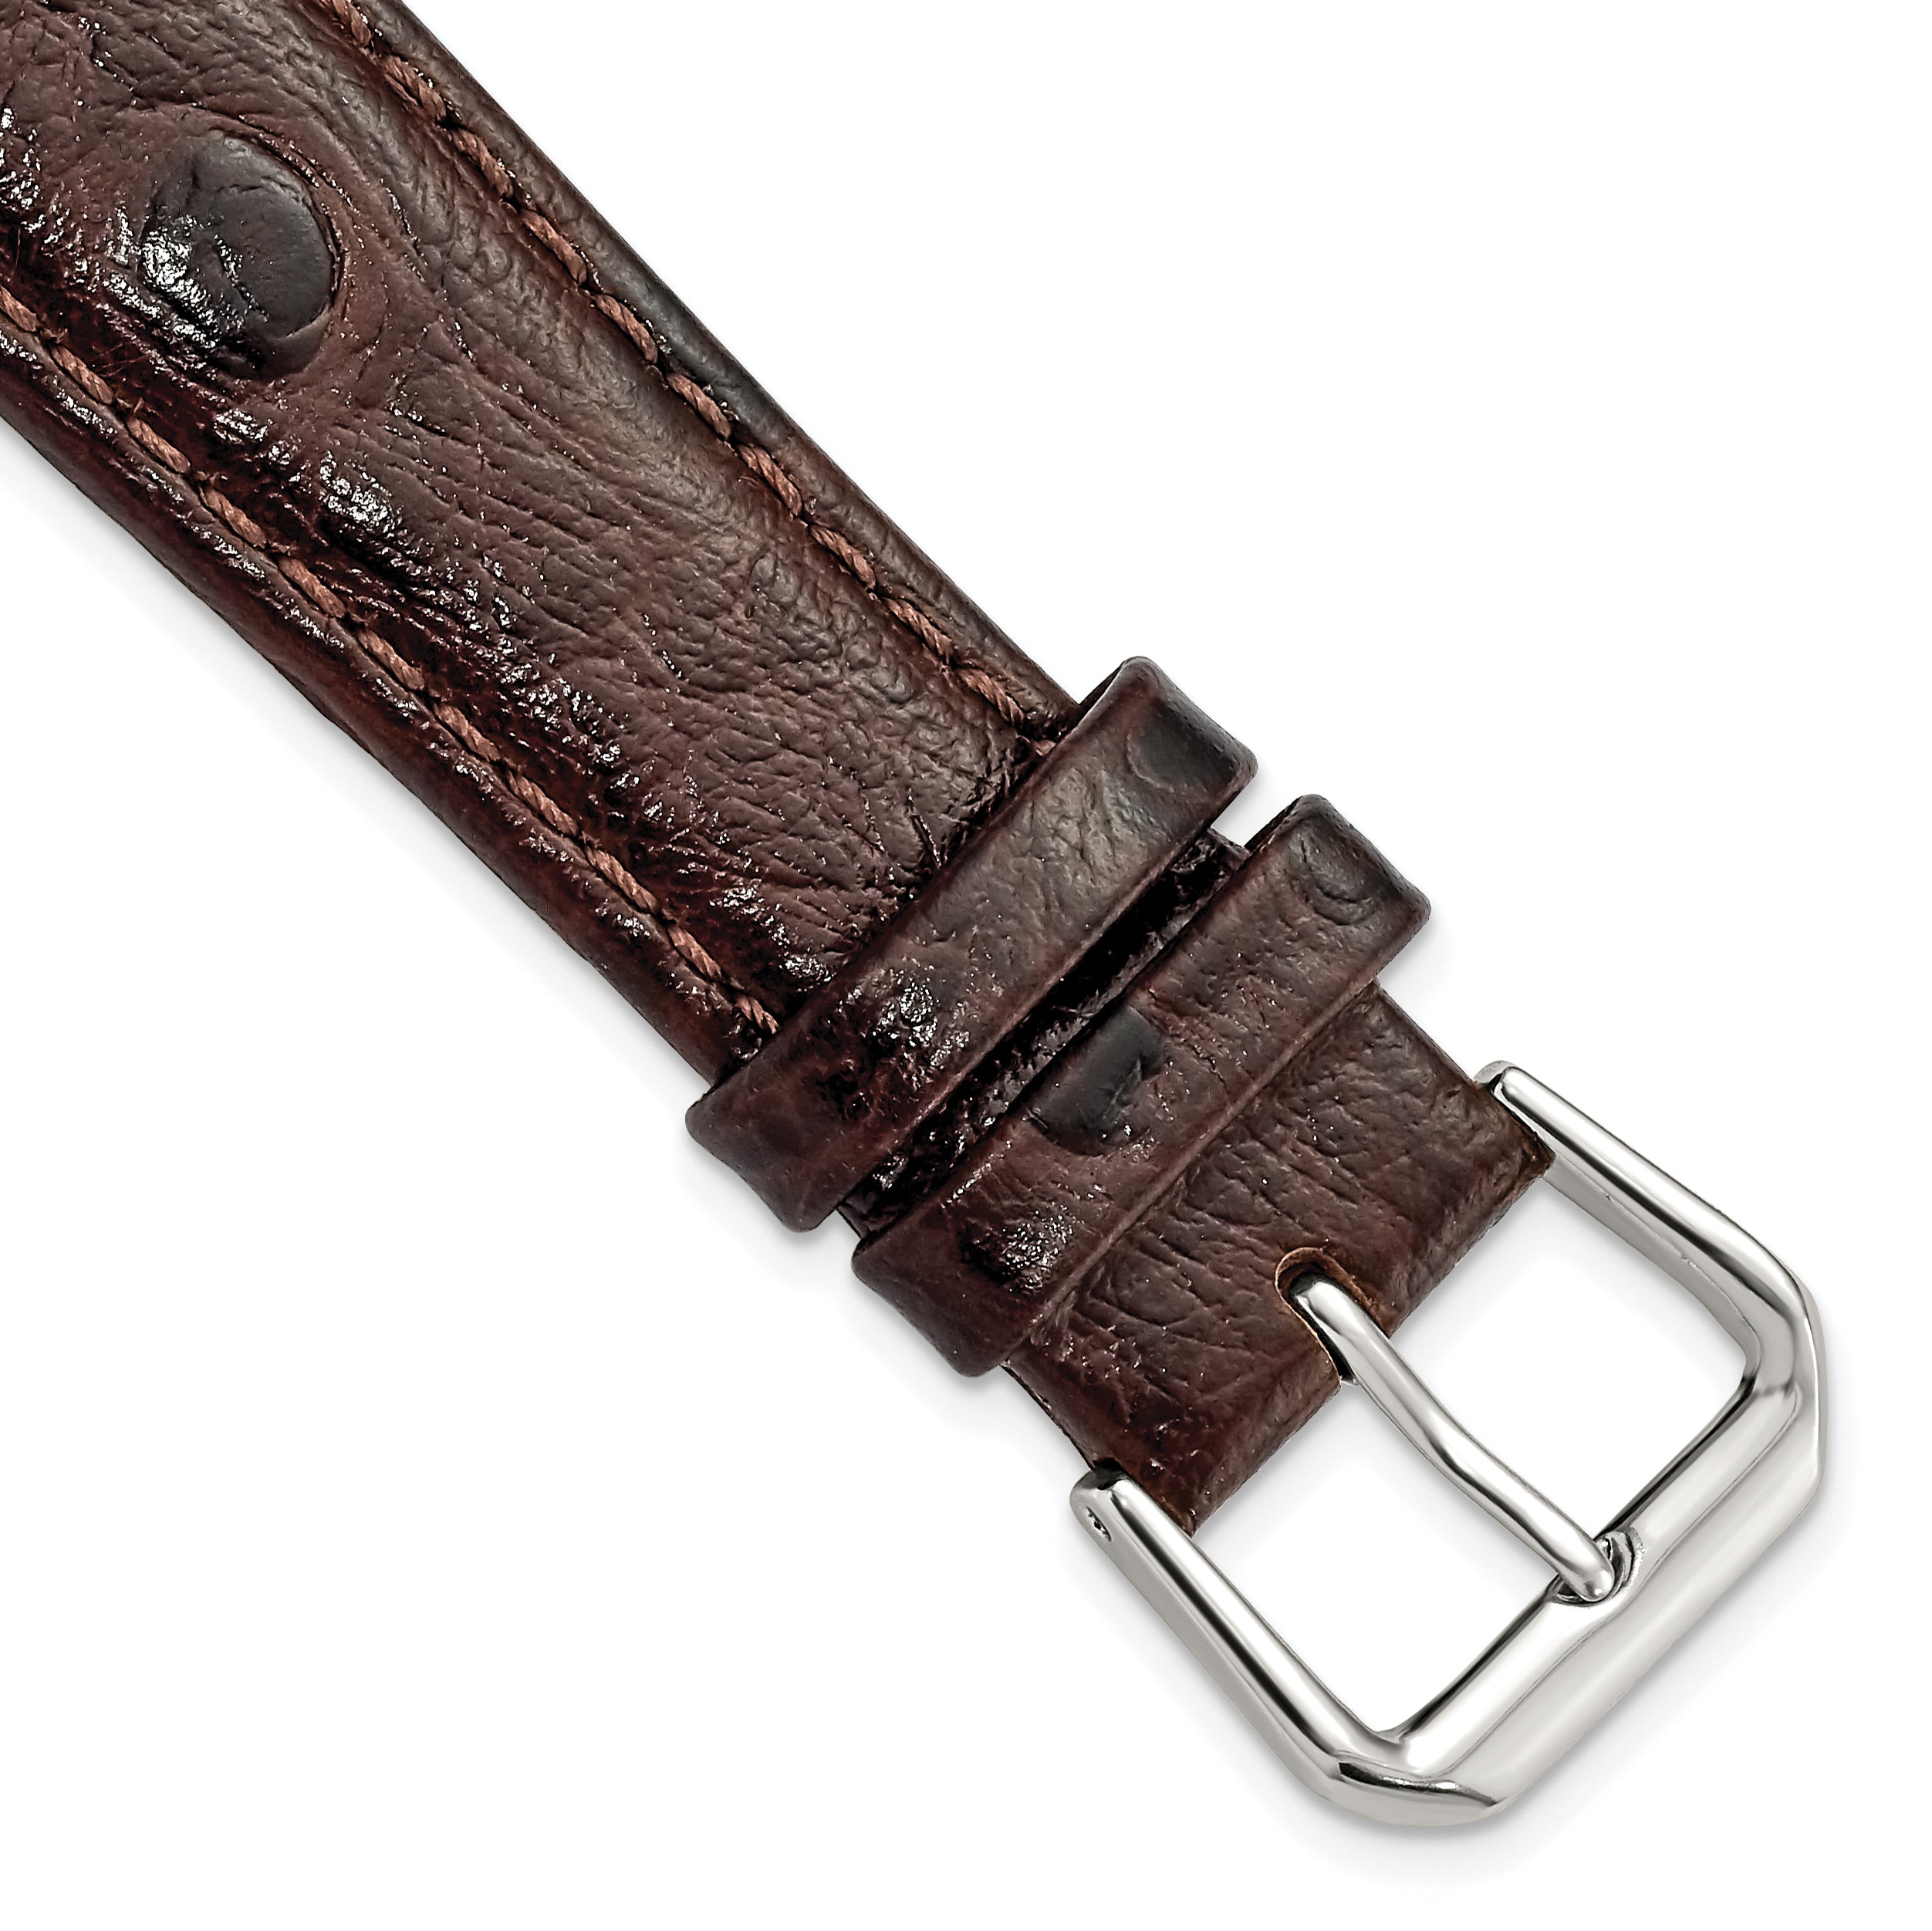 DeBeer 19mm Brown Ostrich Grain Leather with Silver-tone Buckle 7.5 inch Watch Band